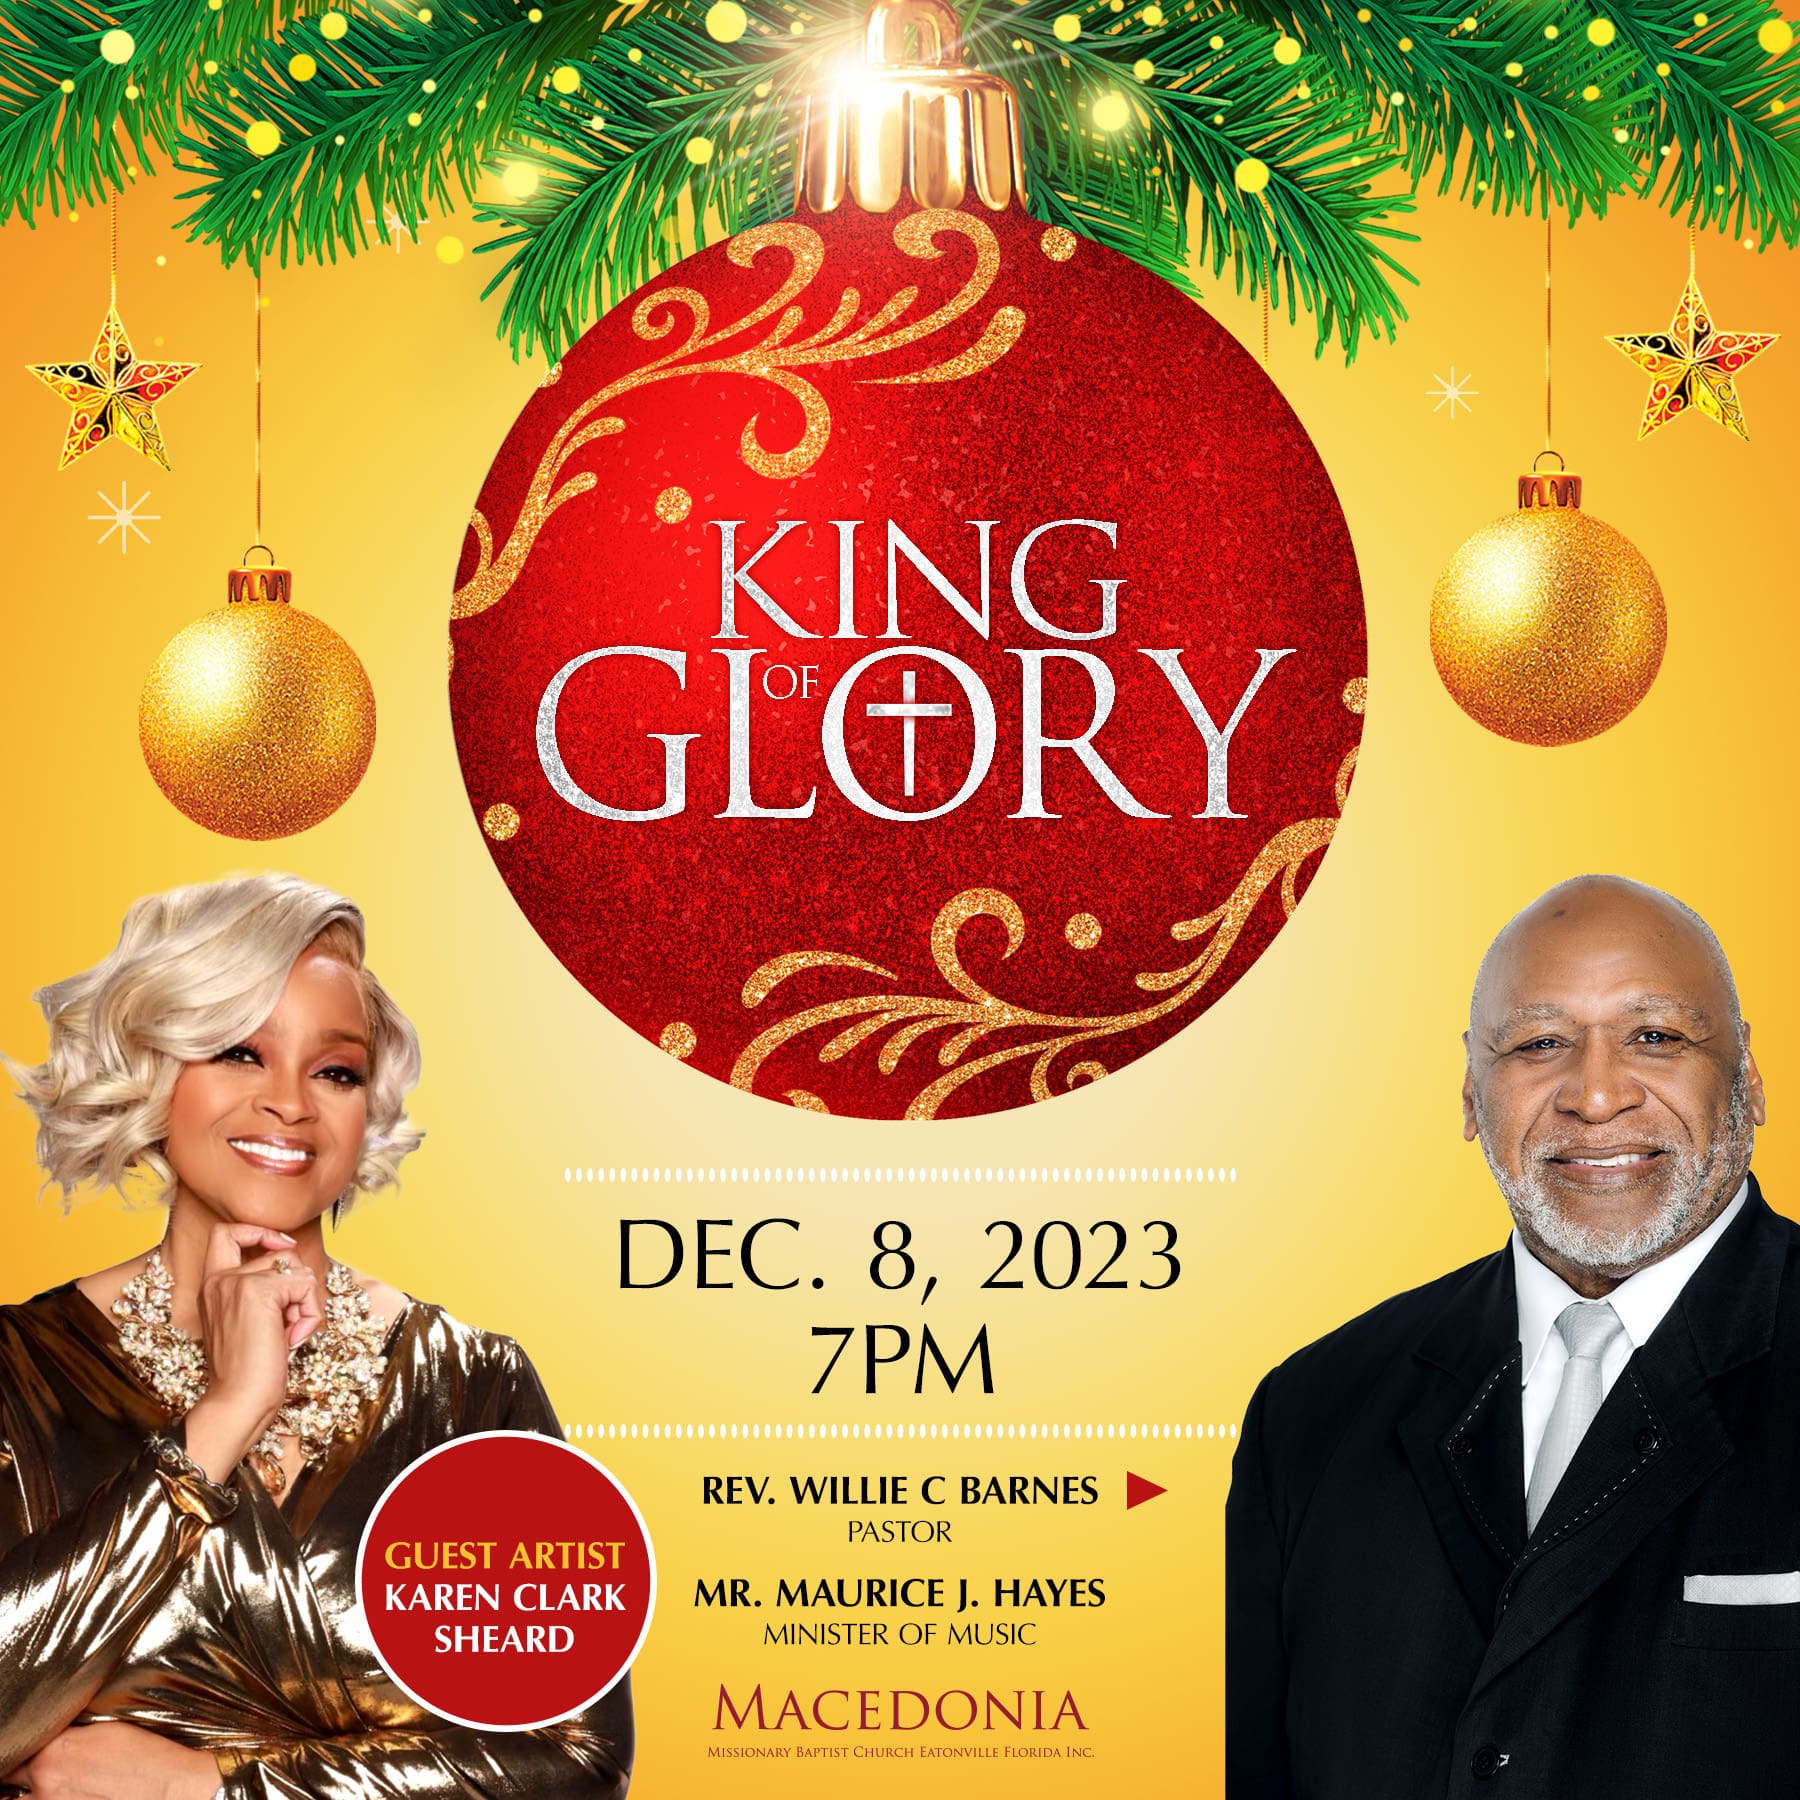 King of Glory 2023 on December 8